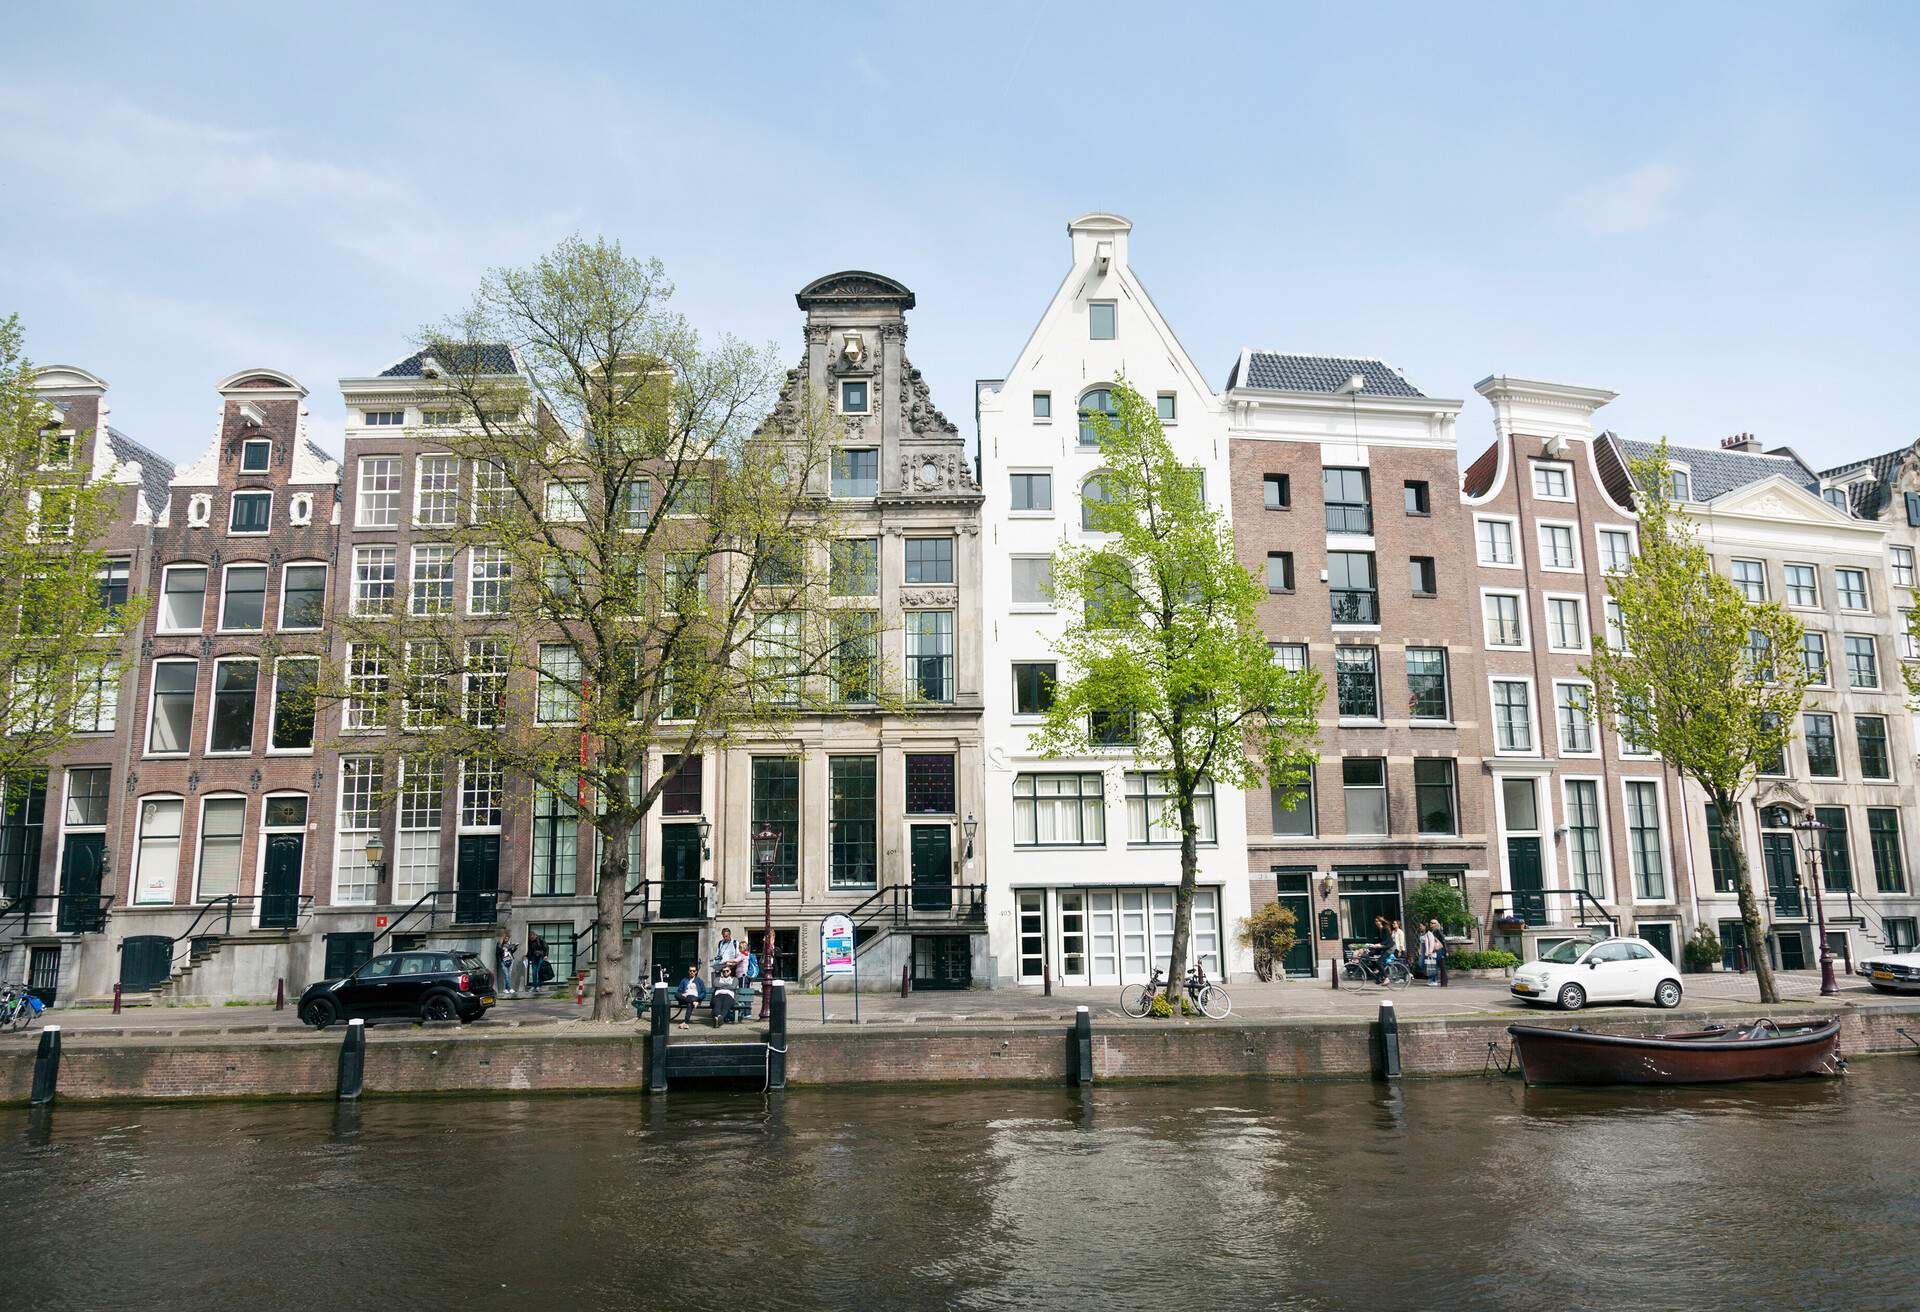 A row of traditional dutch buildings by the canal in Amsterdam on a spring day 